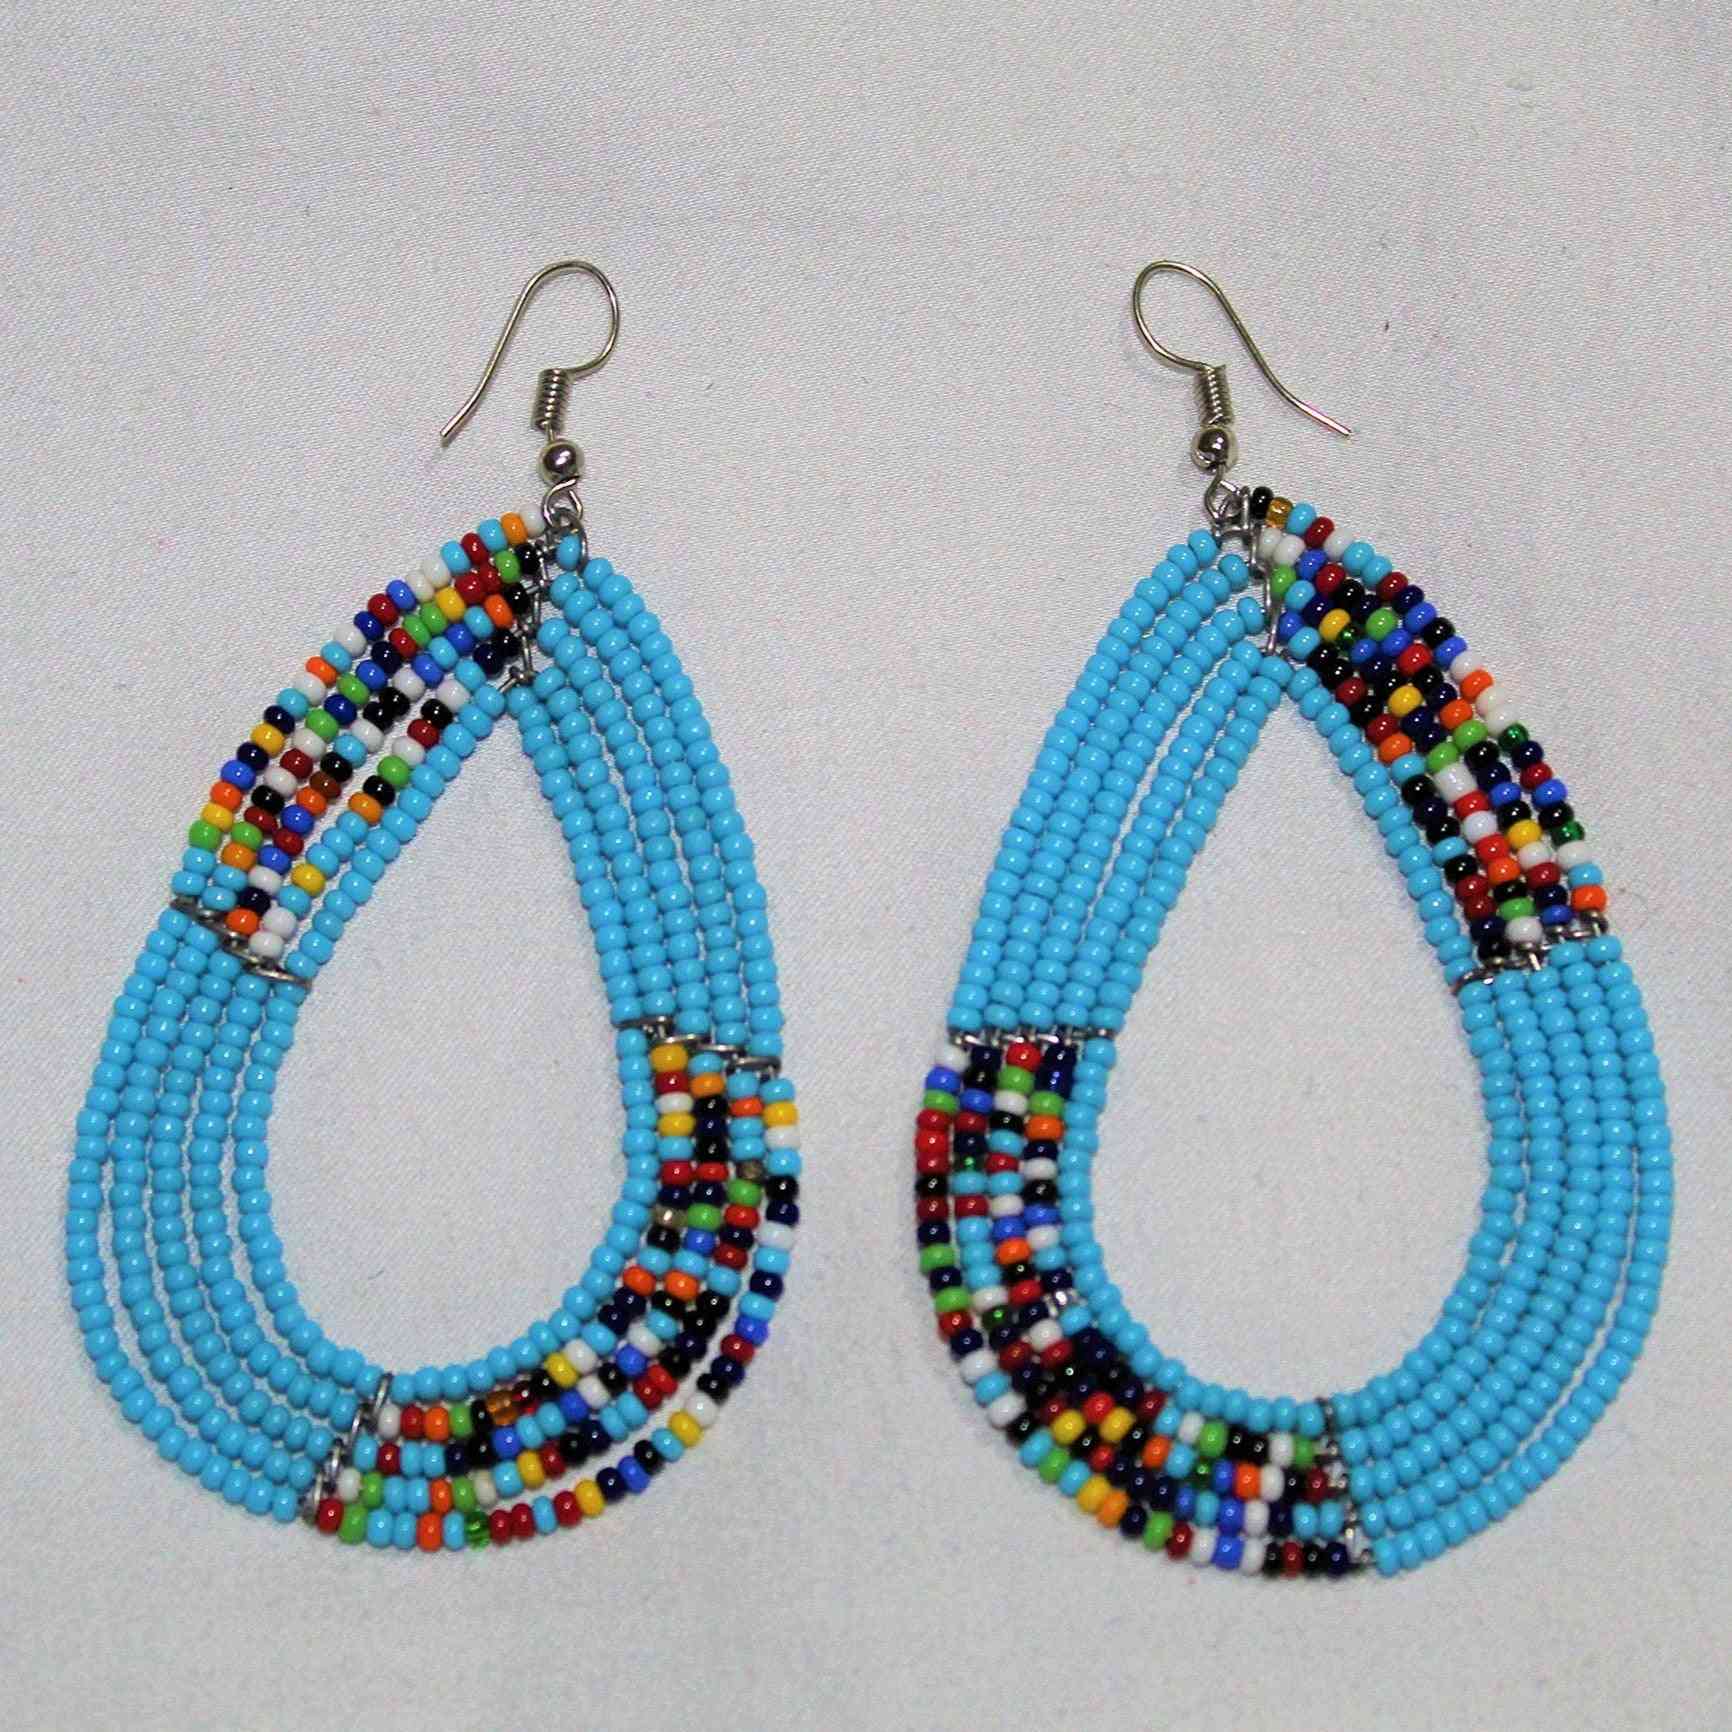 Oval Shaped, African Handcrafted Earrings